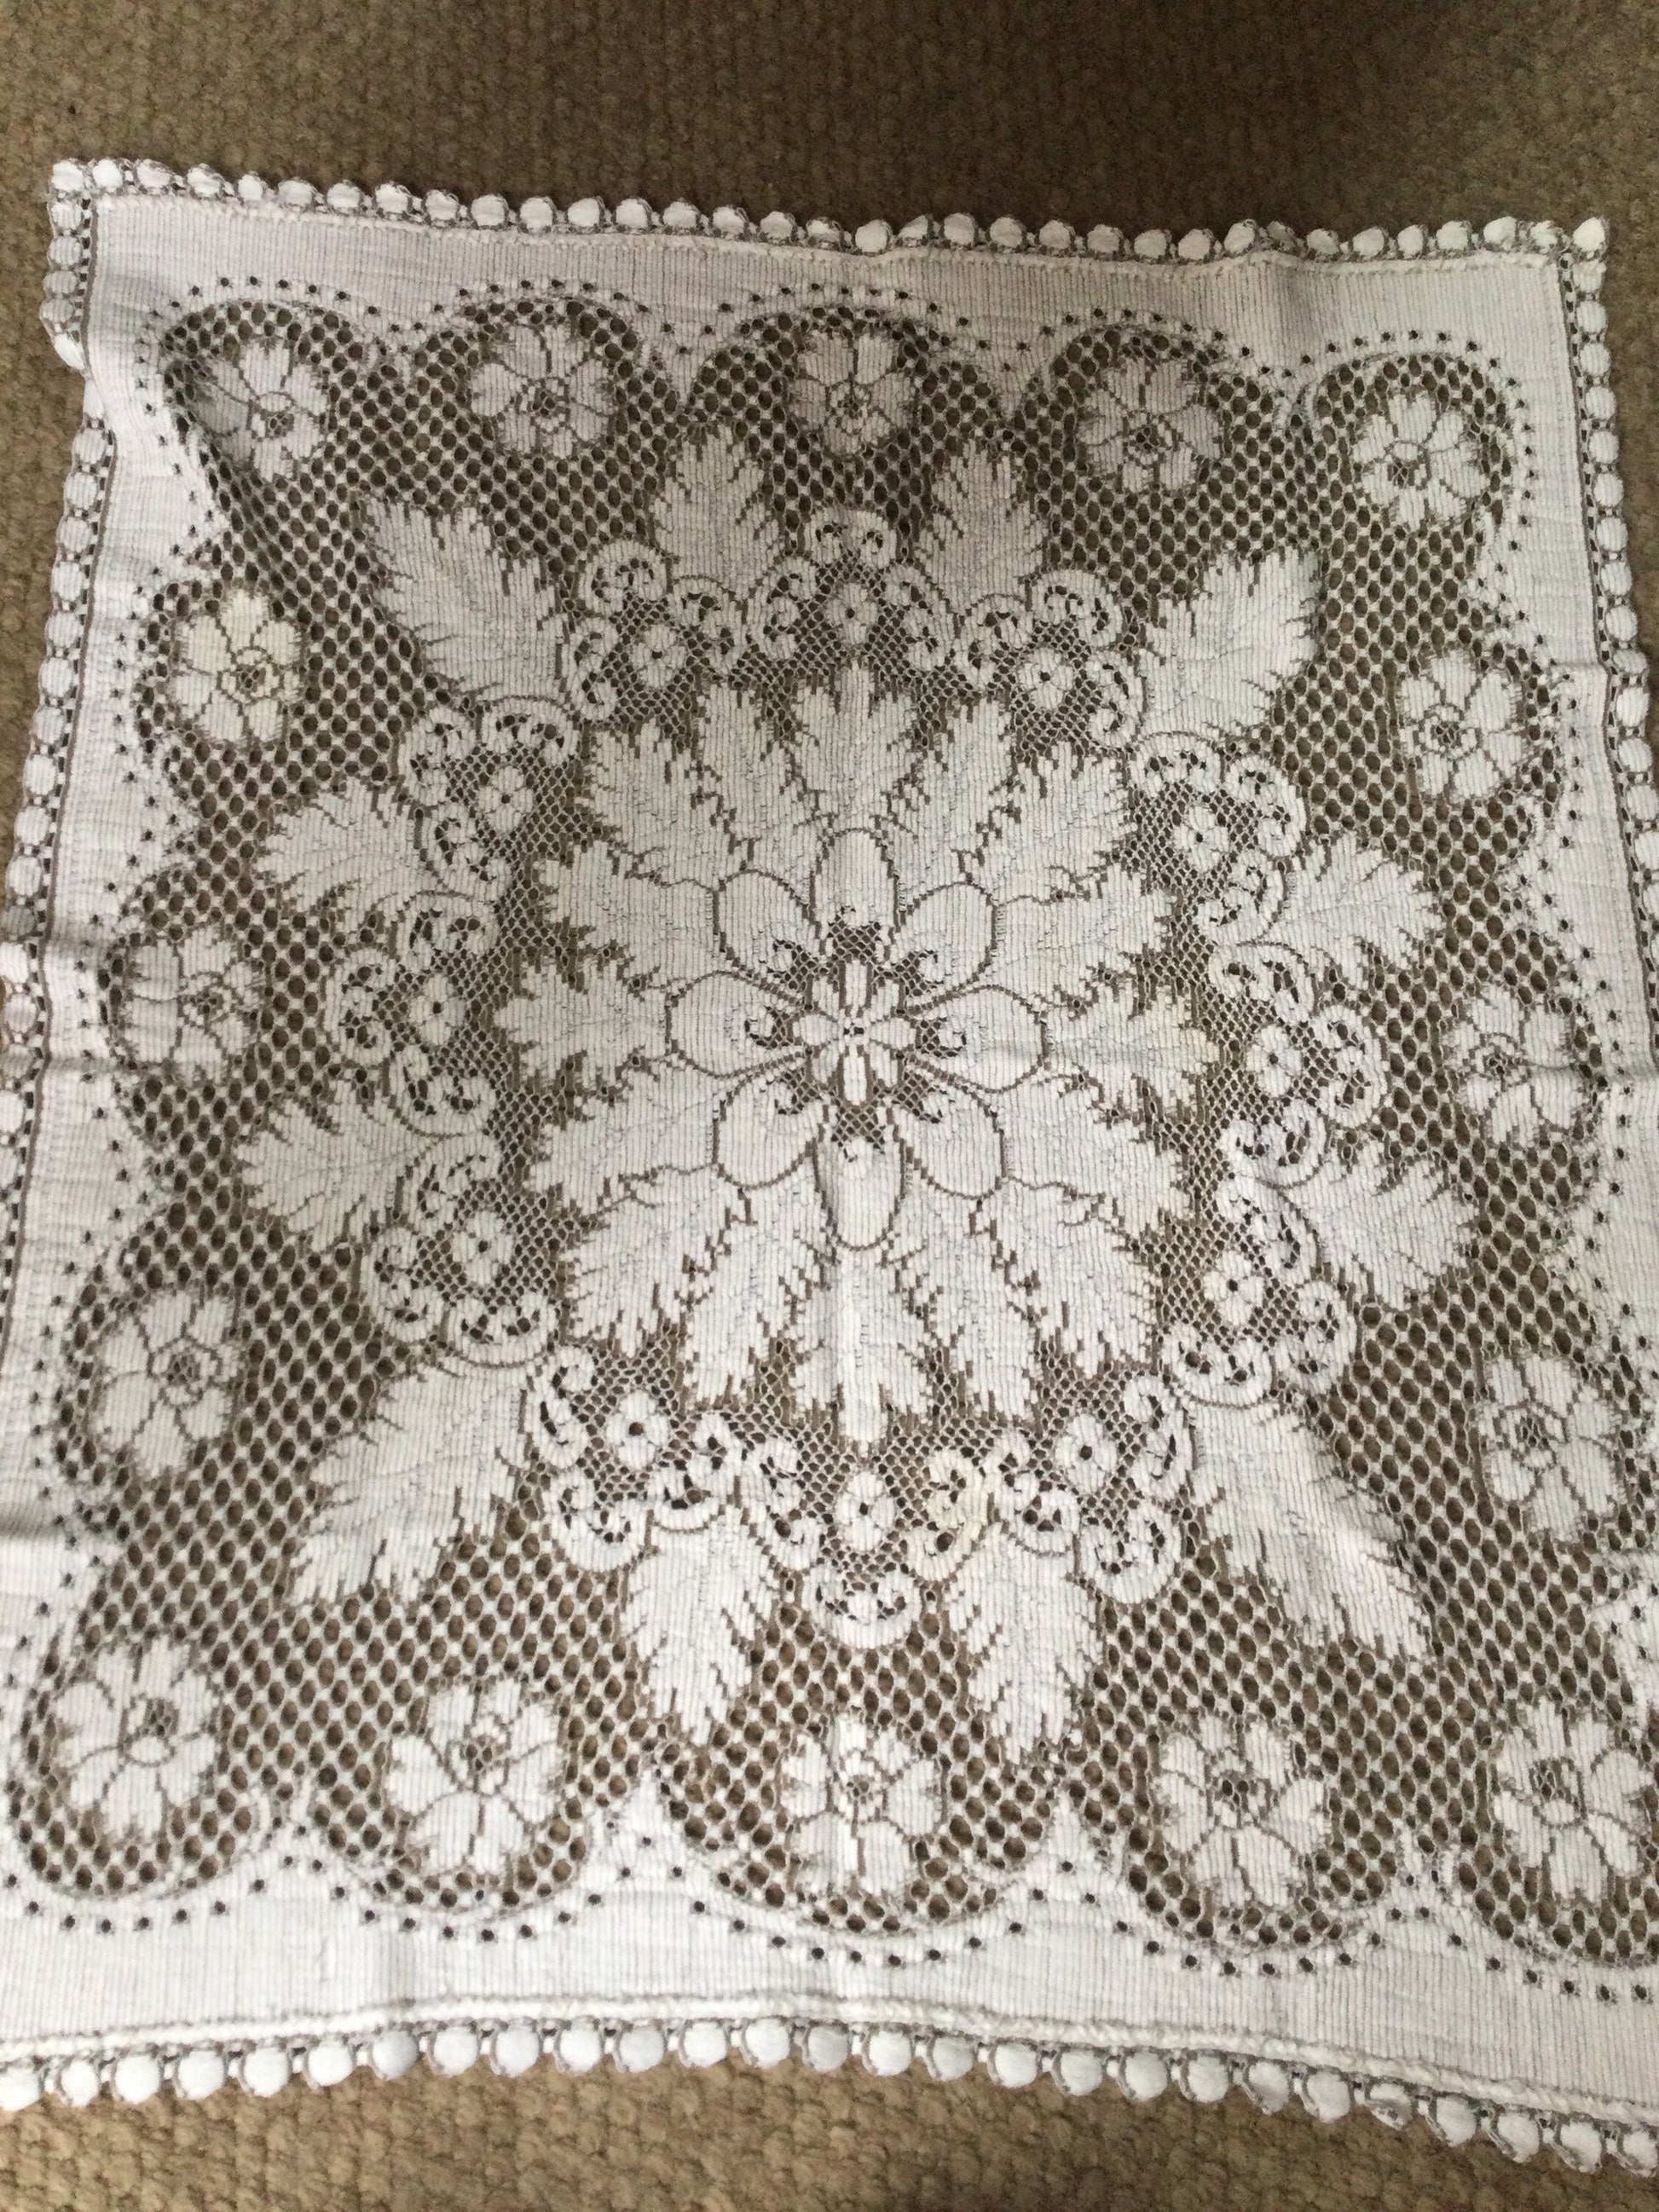 29 x 33” rectangular tablecloth taupe brown cream openwork lace effect floral embroidered